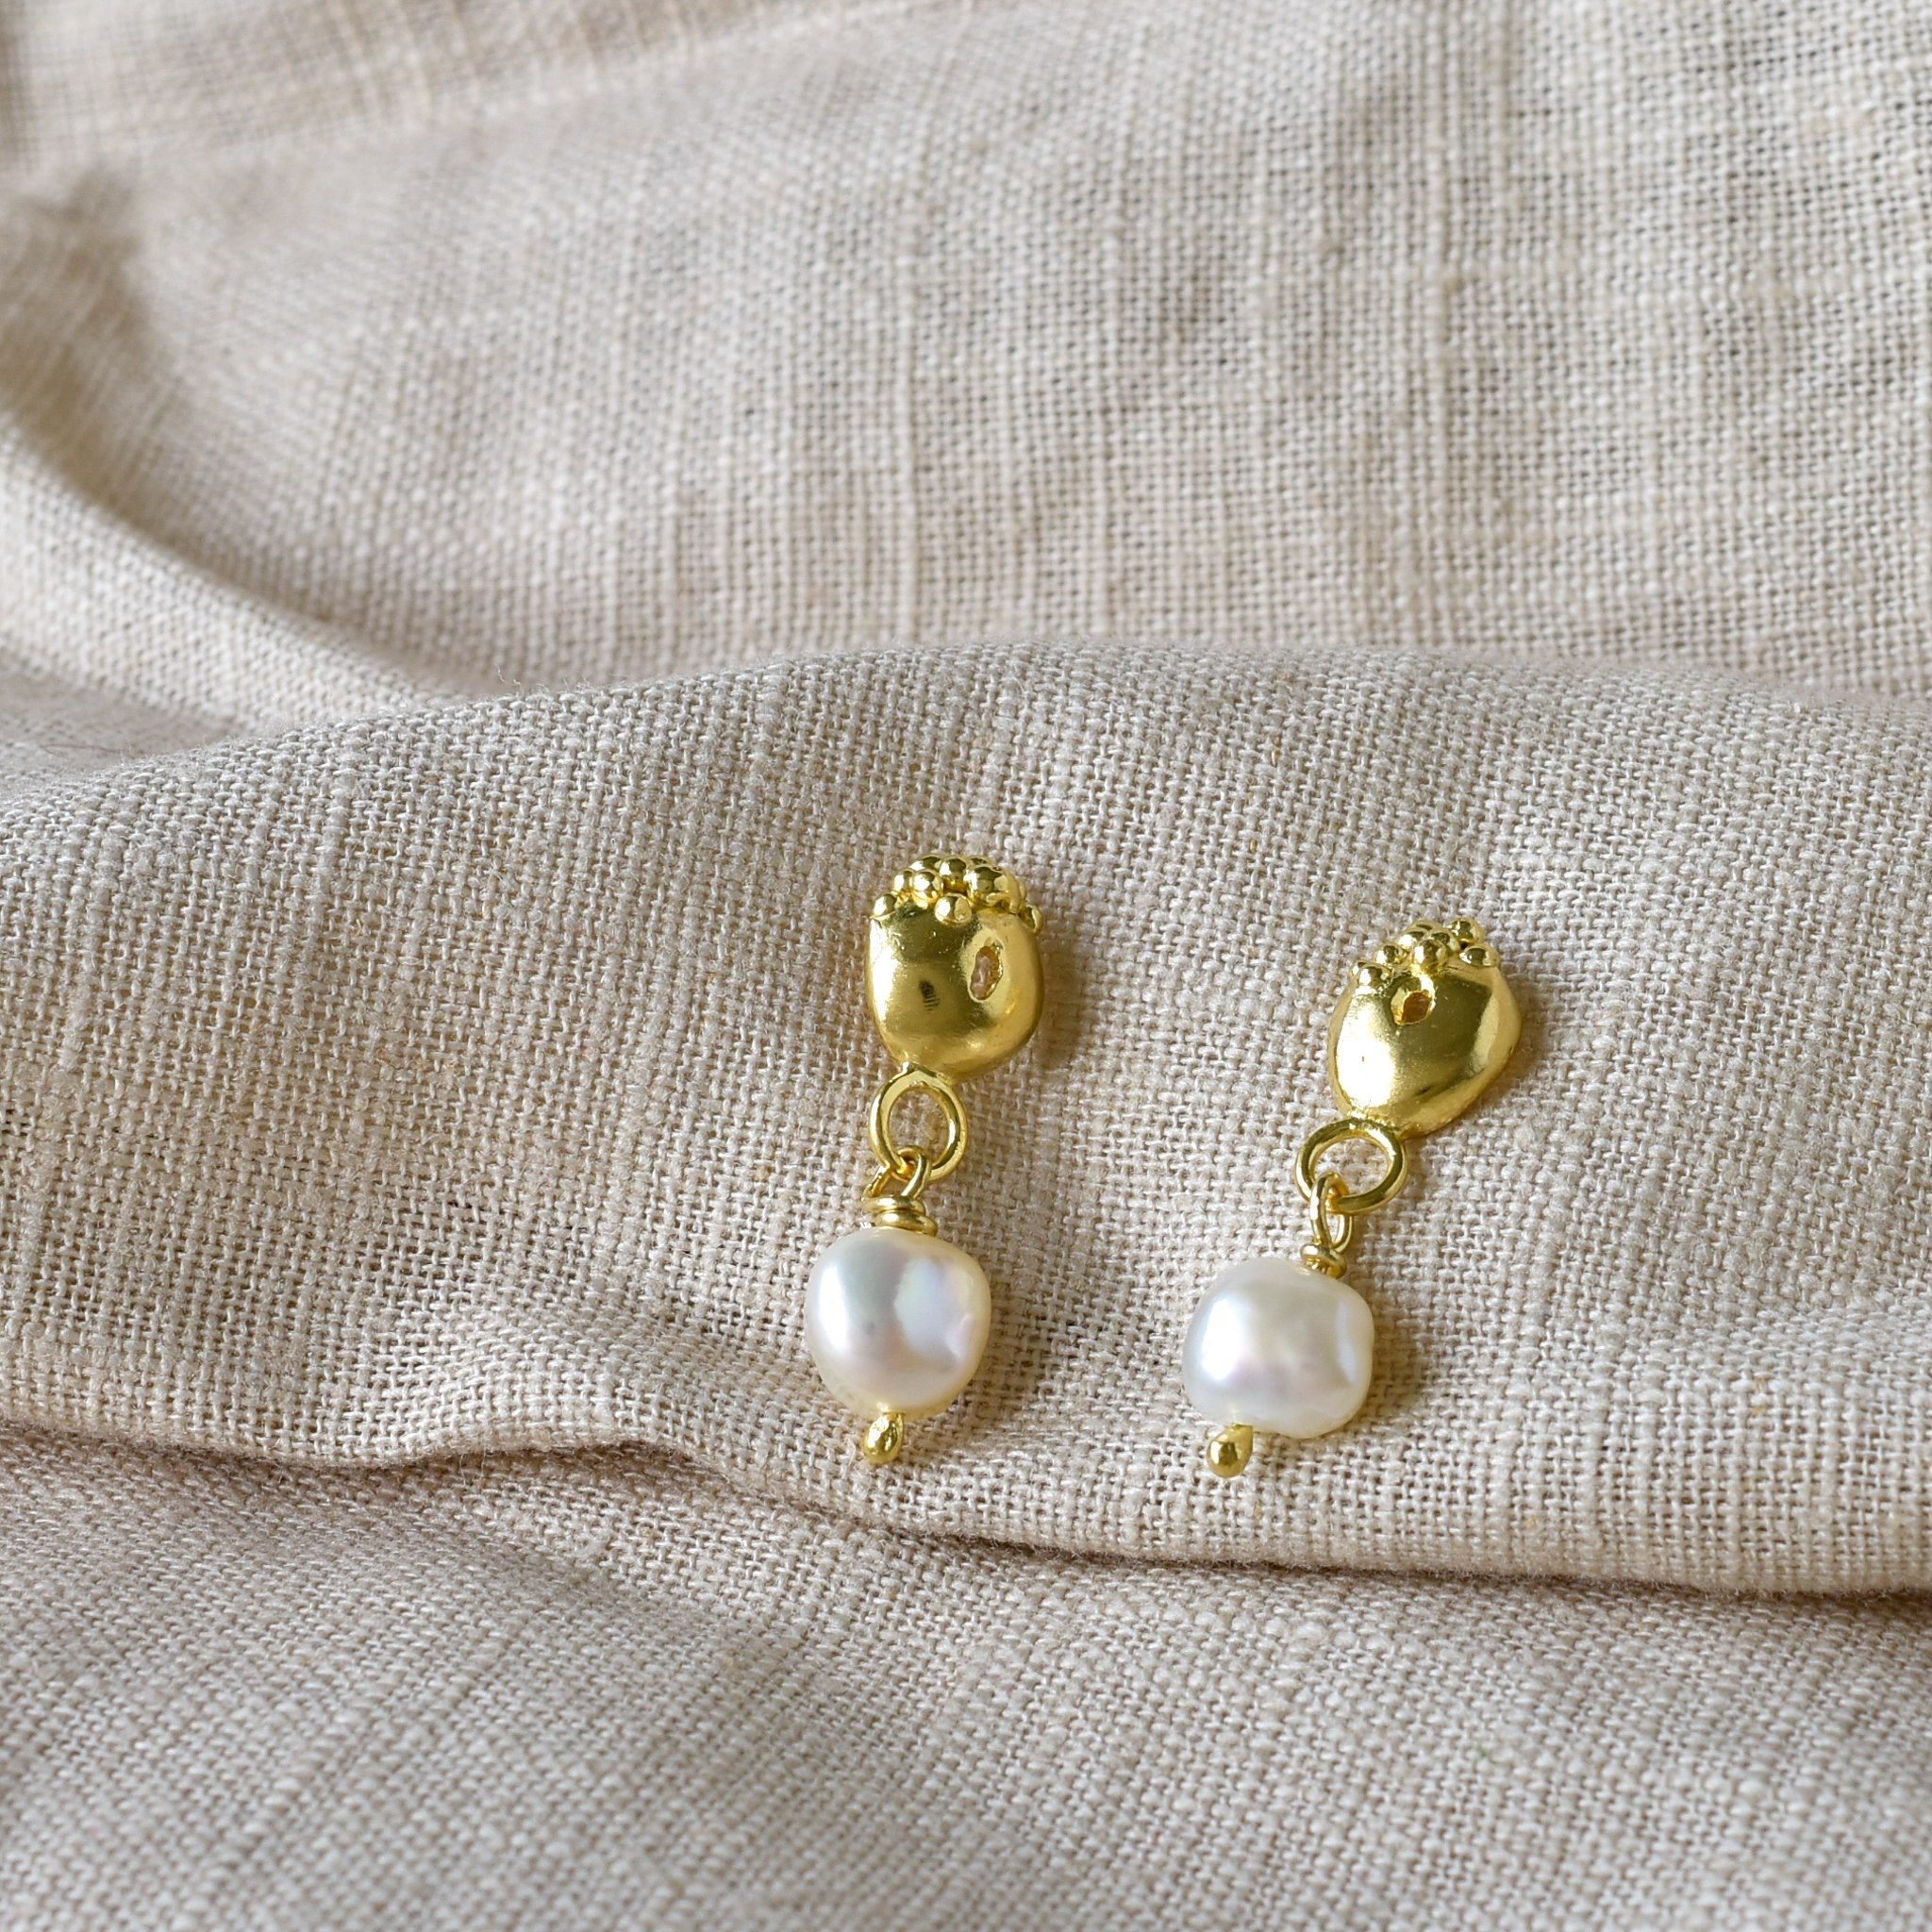 Going into Spring with our beautiful gold pearl earrings! Little pearlies to elevate your outfit.
.
.
.
.
 #goldearringsforwomen #goldearrings #goldearring #earringslover #earringstagram🔝 #pearljewellery #pearlearrings #pearls #jewellery #pearllover